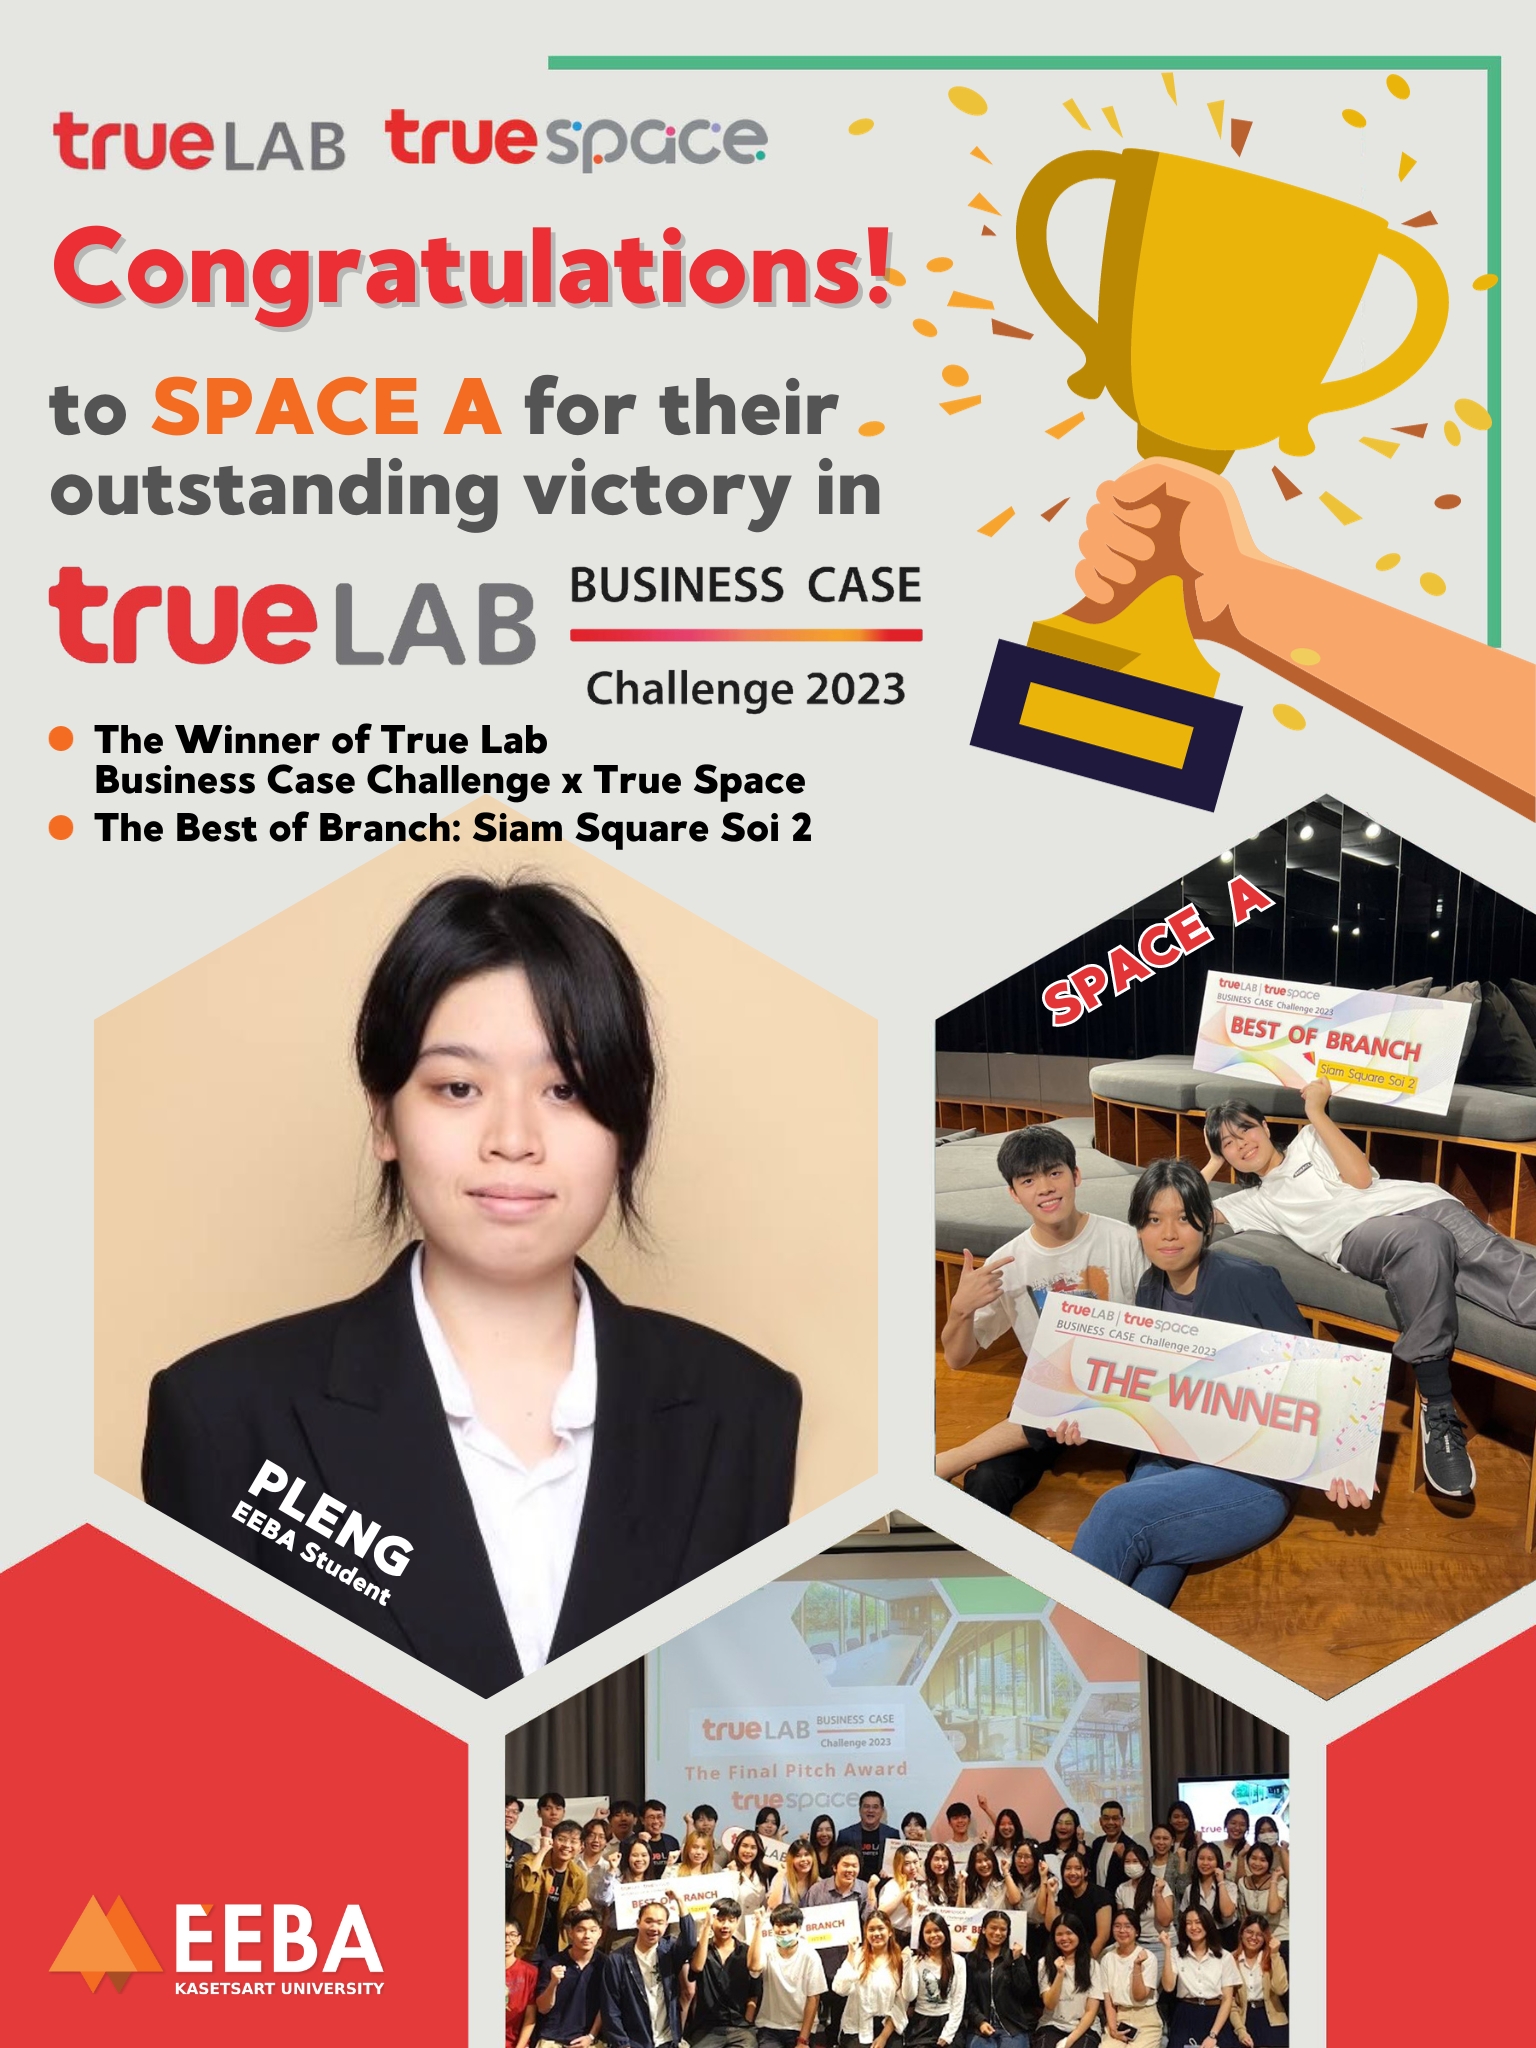 Awarded from “TrueLAB Business Case Challenge 2023”